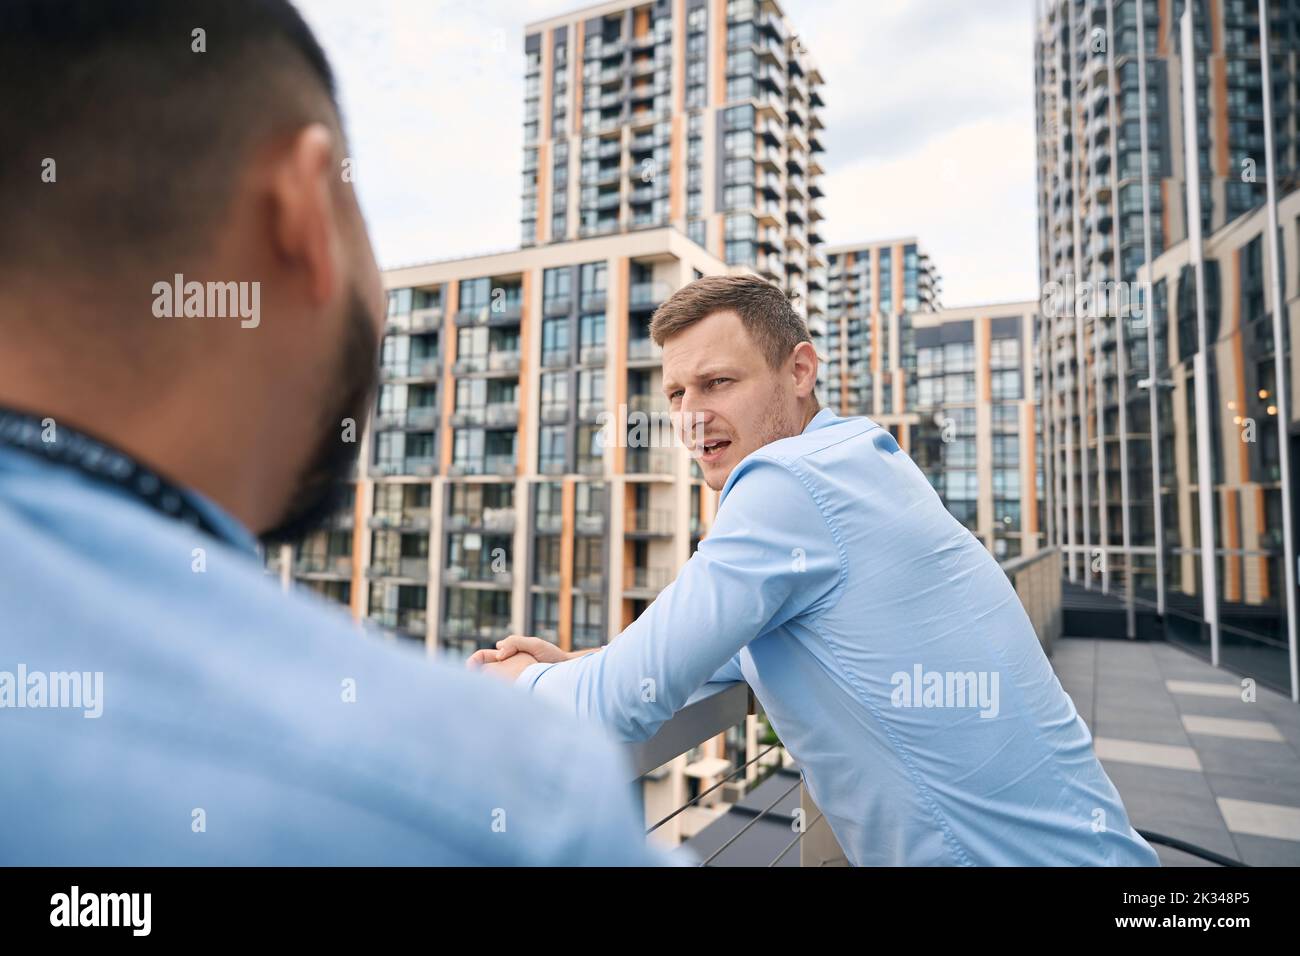 Office employee conversing with his colleague outdoors Stock Photo